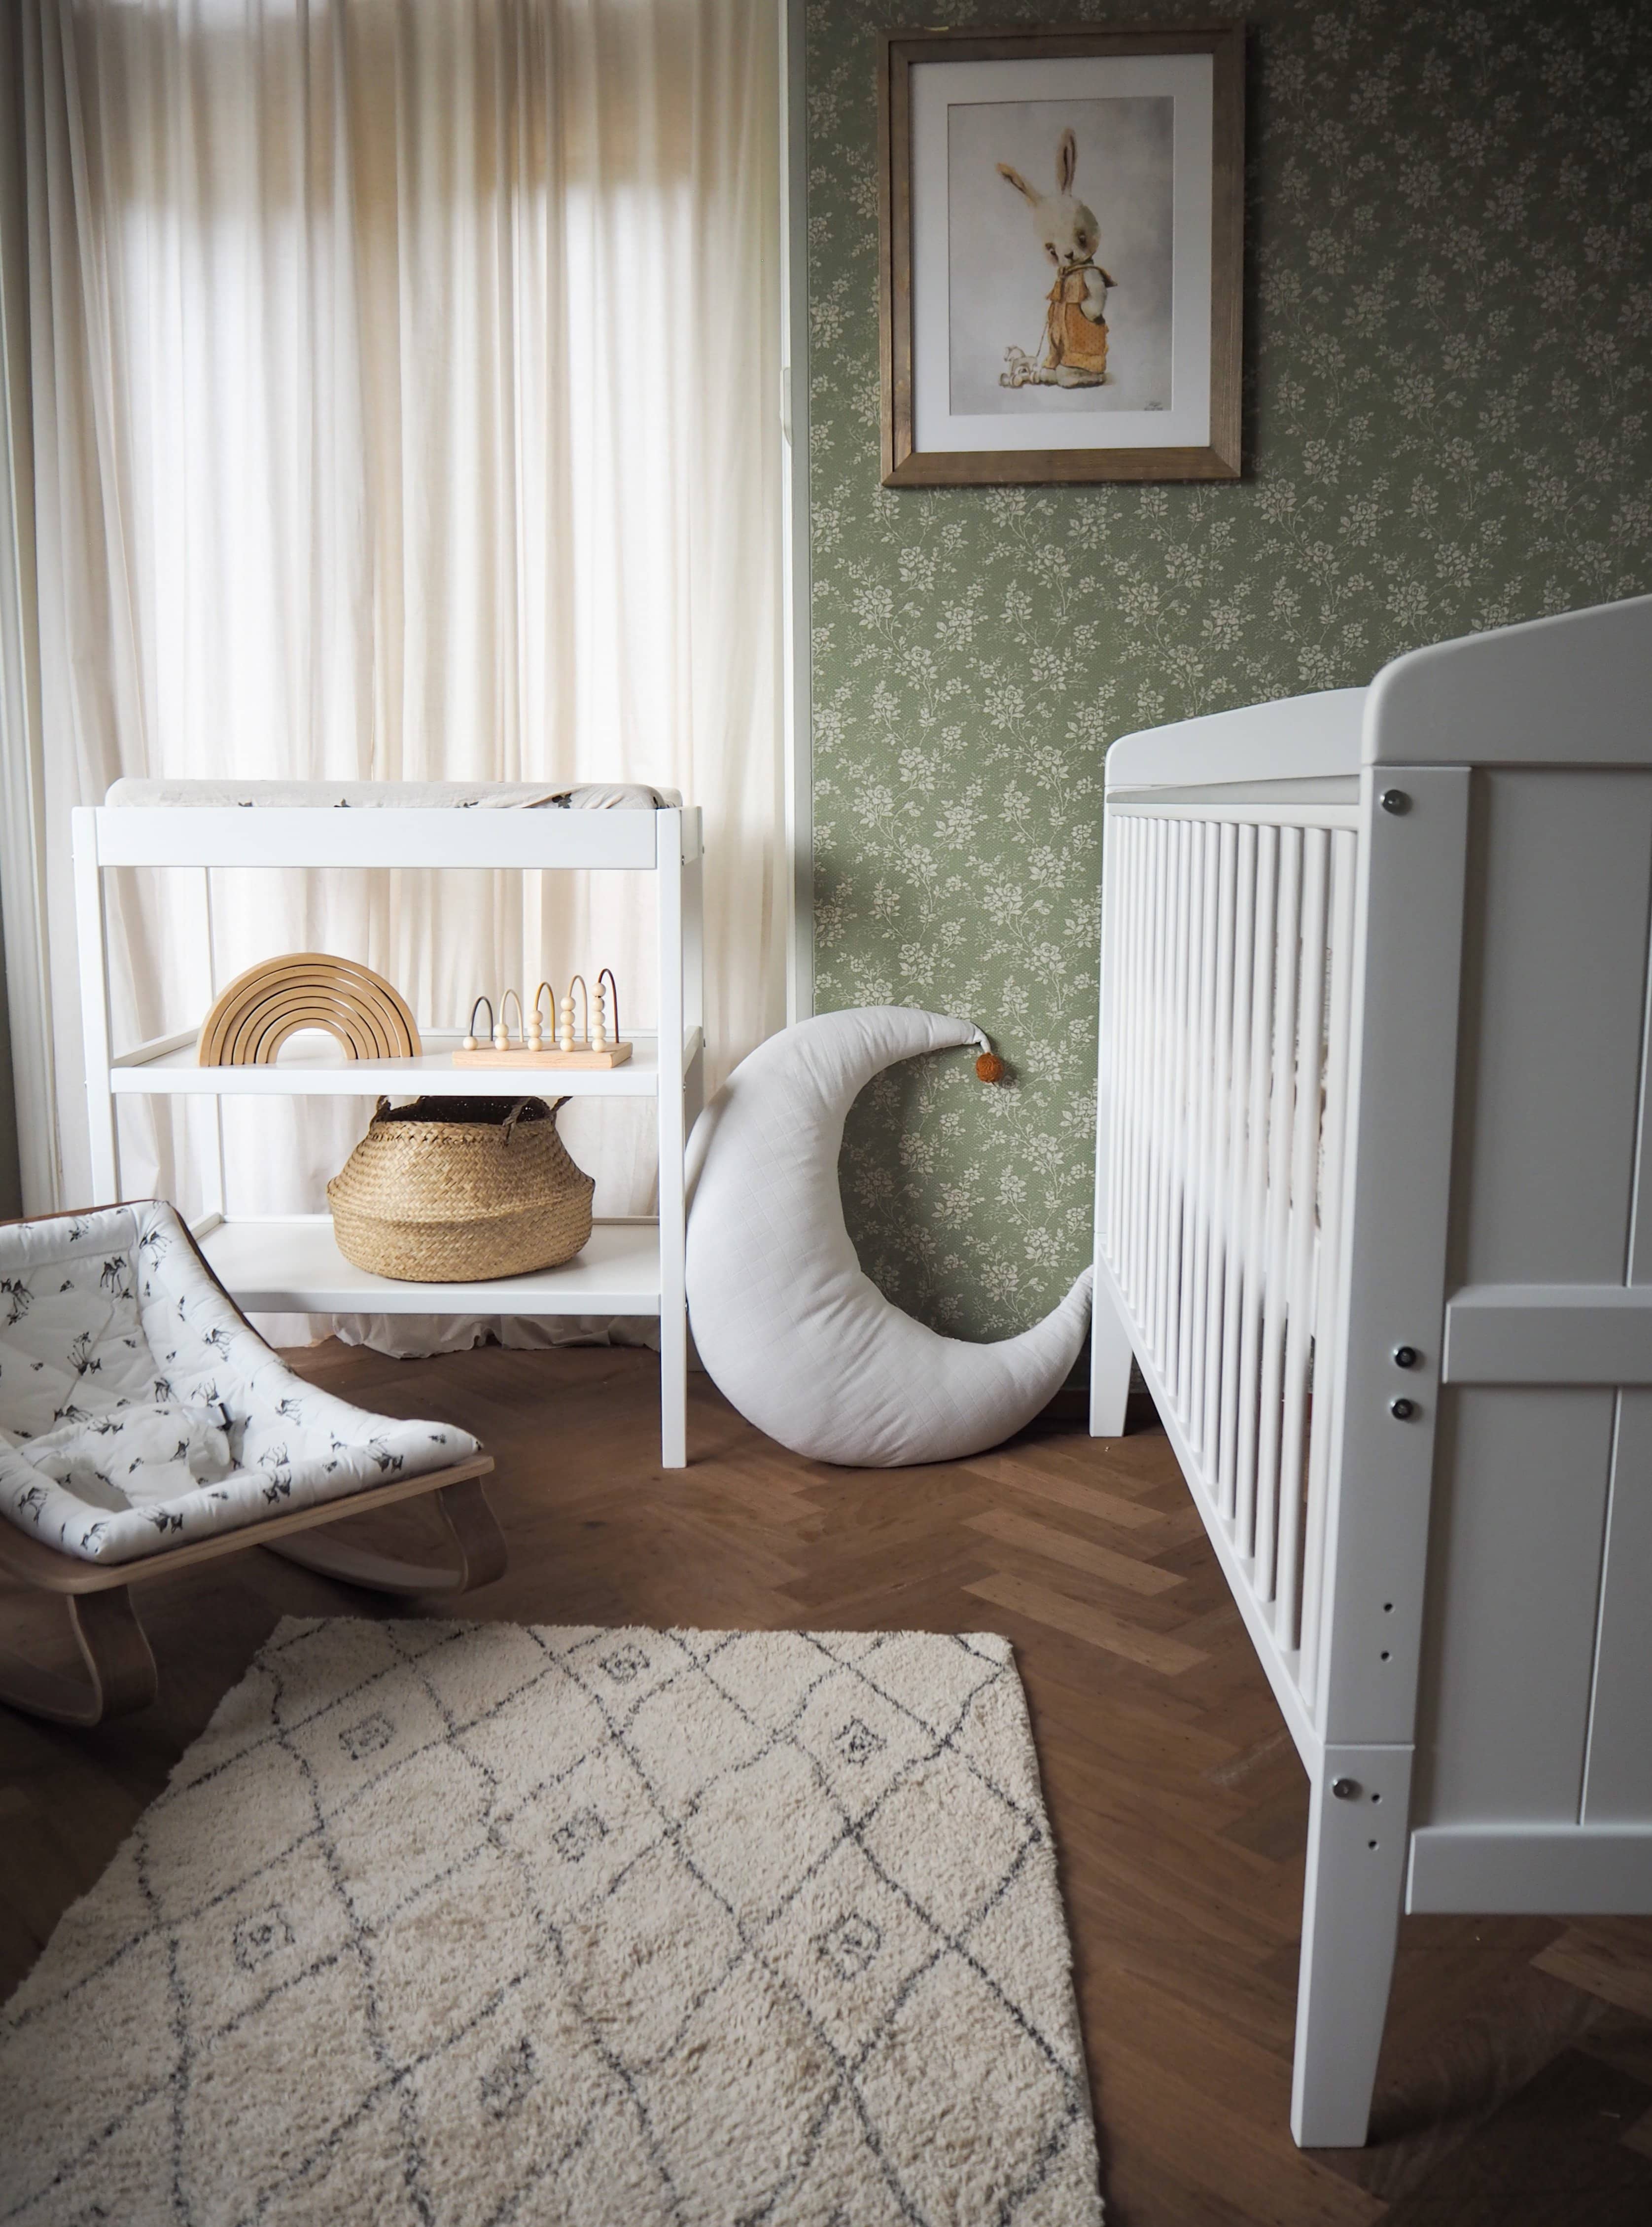 Woodies **Bundle offer** Noble White 2 in 1 Cot Bed + Mattress + Day Bed Side (140cm)  - Hola BB